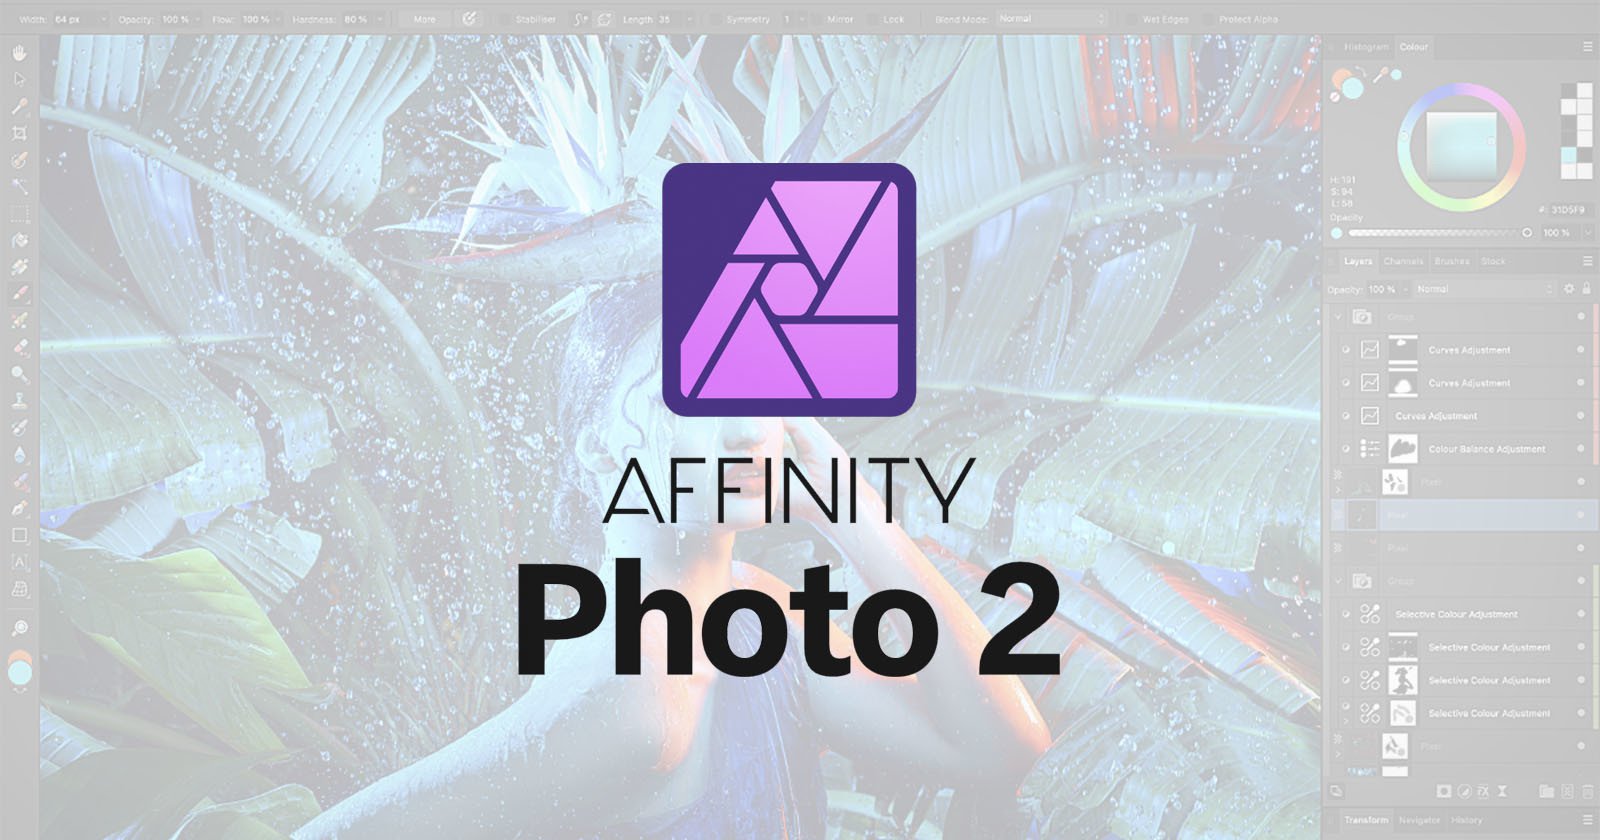 Affinity Photo 2 Adds Tons of Features, Still Doesnt Require a Subscription